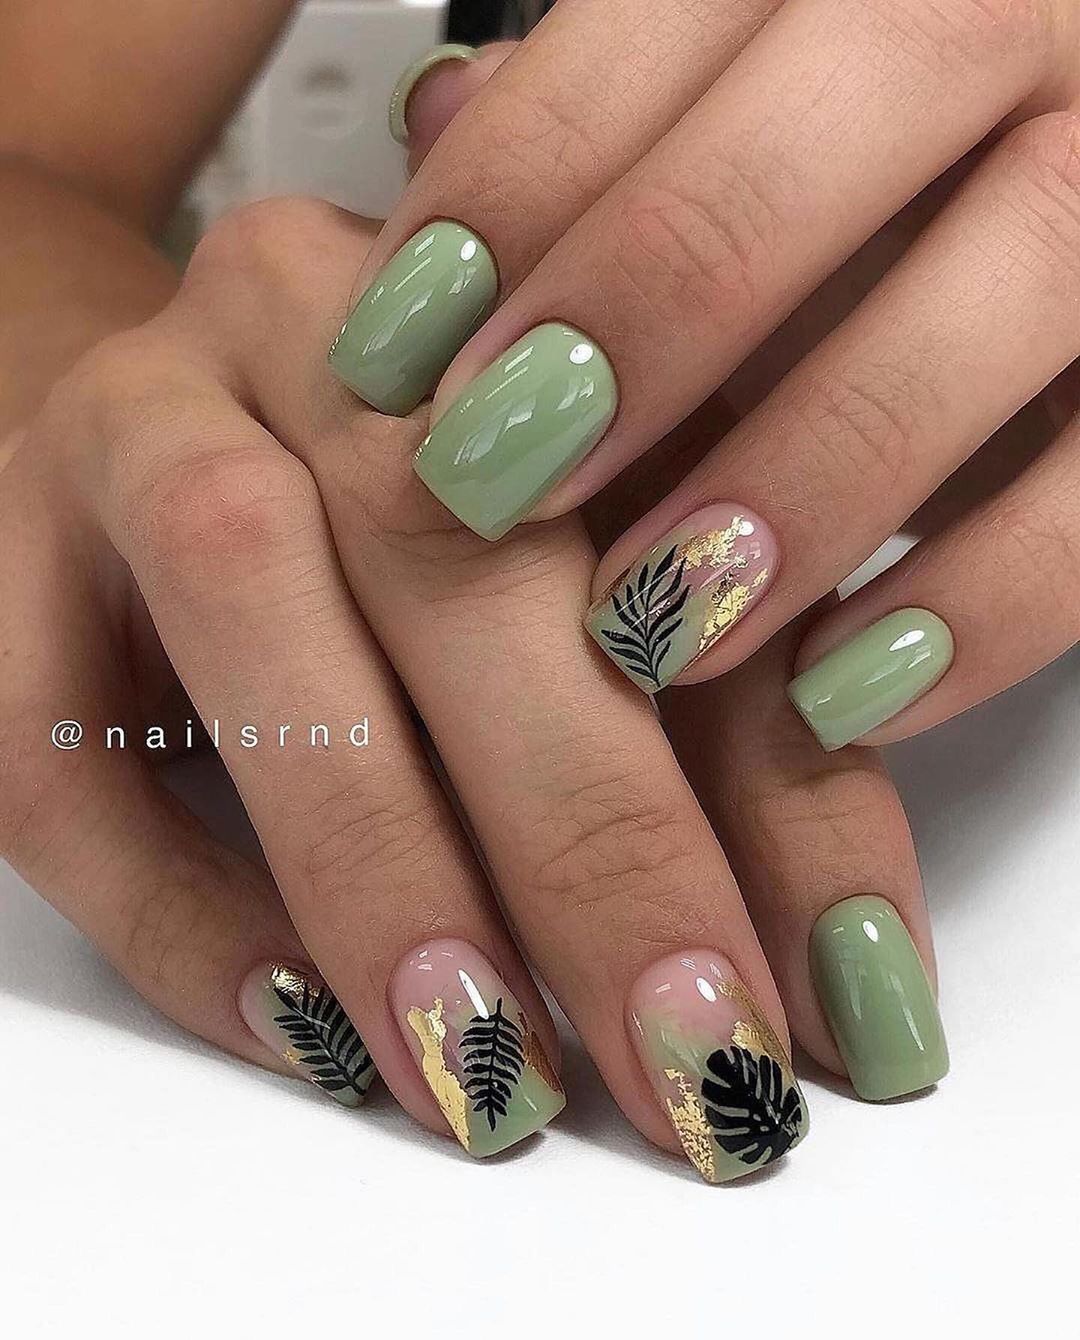 25 Trending Summer Nail Colors And Designs For 2021 images 11